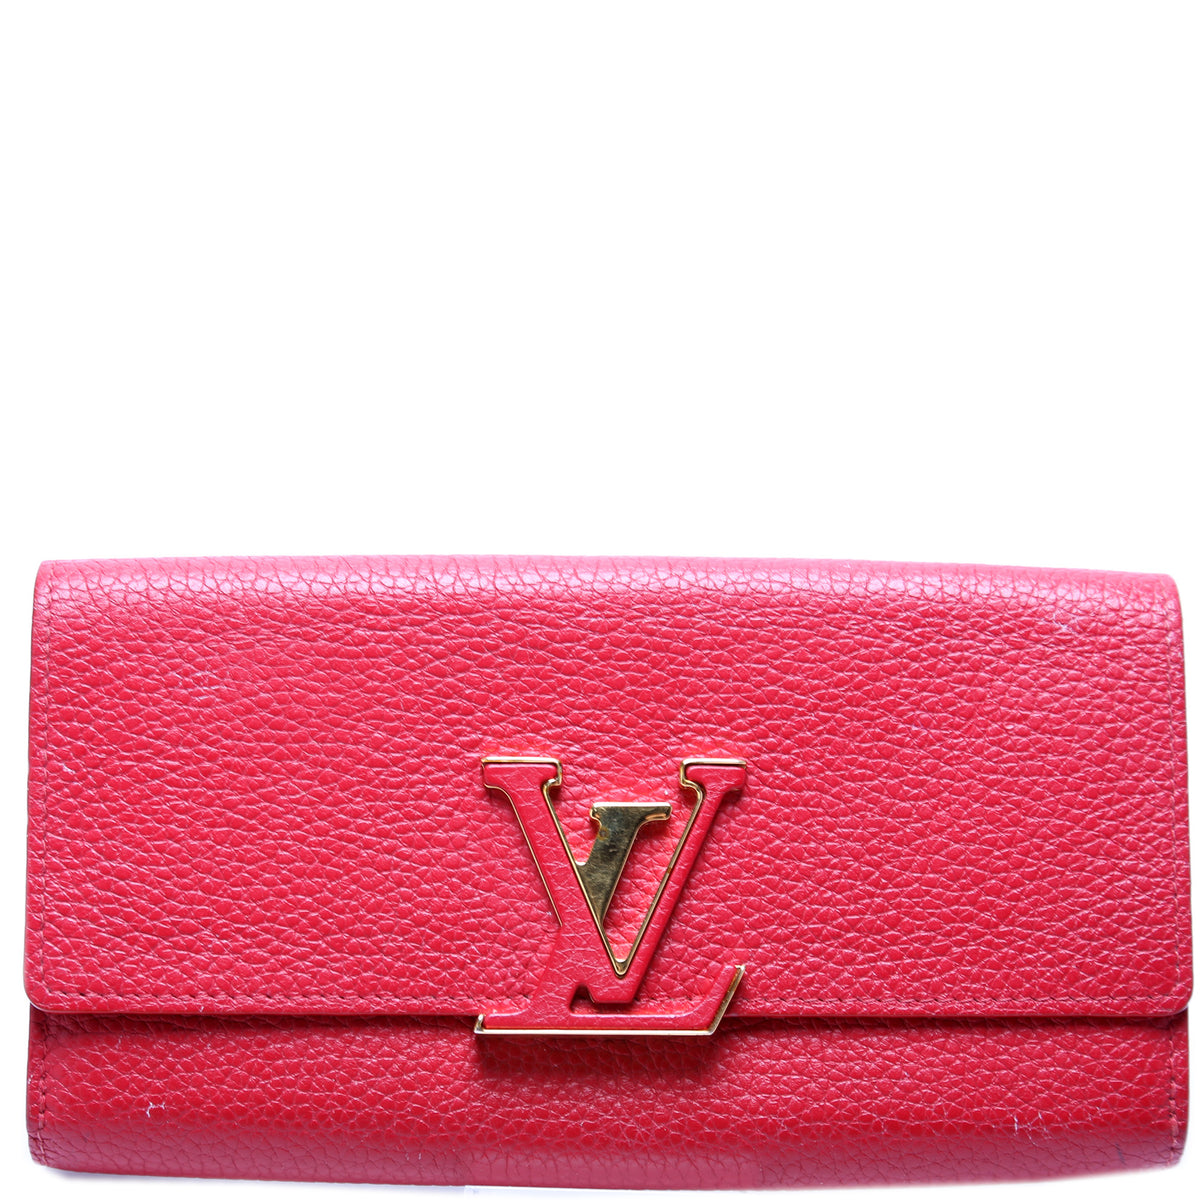 Louis Vuitton - Authenticated Capucines Wallet - Leather Pink for Women, Very Good Condition